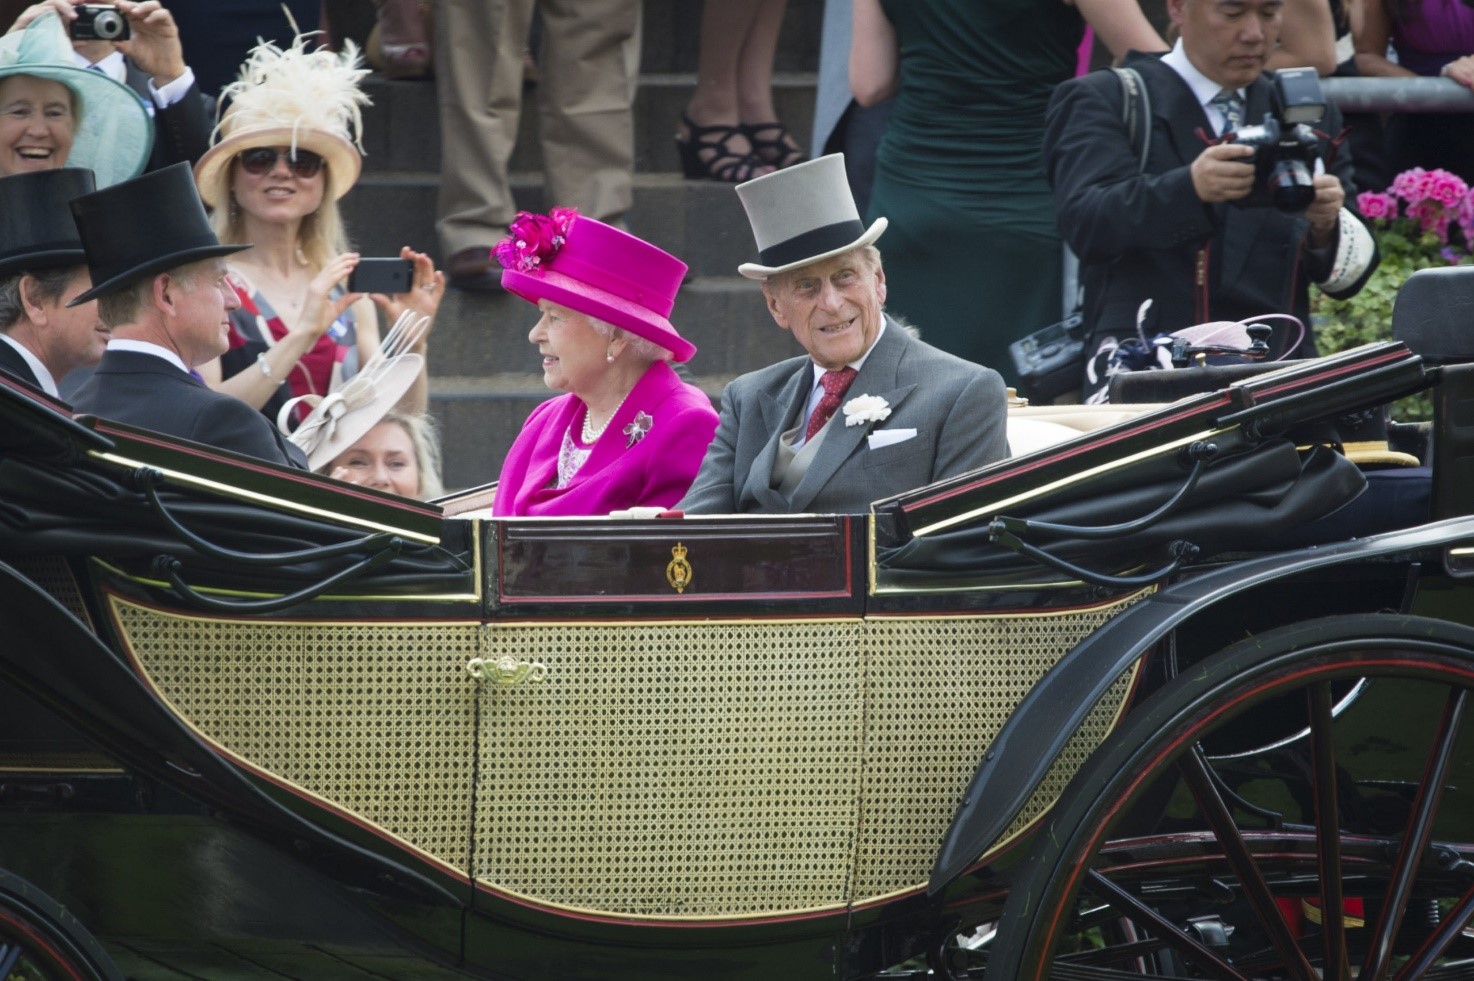 The Queen and Prince Philip in a carriage.